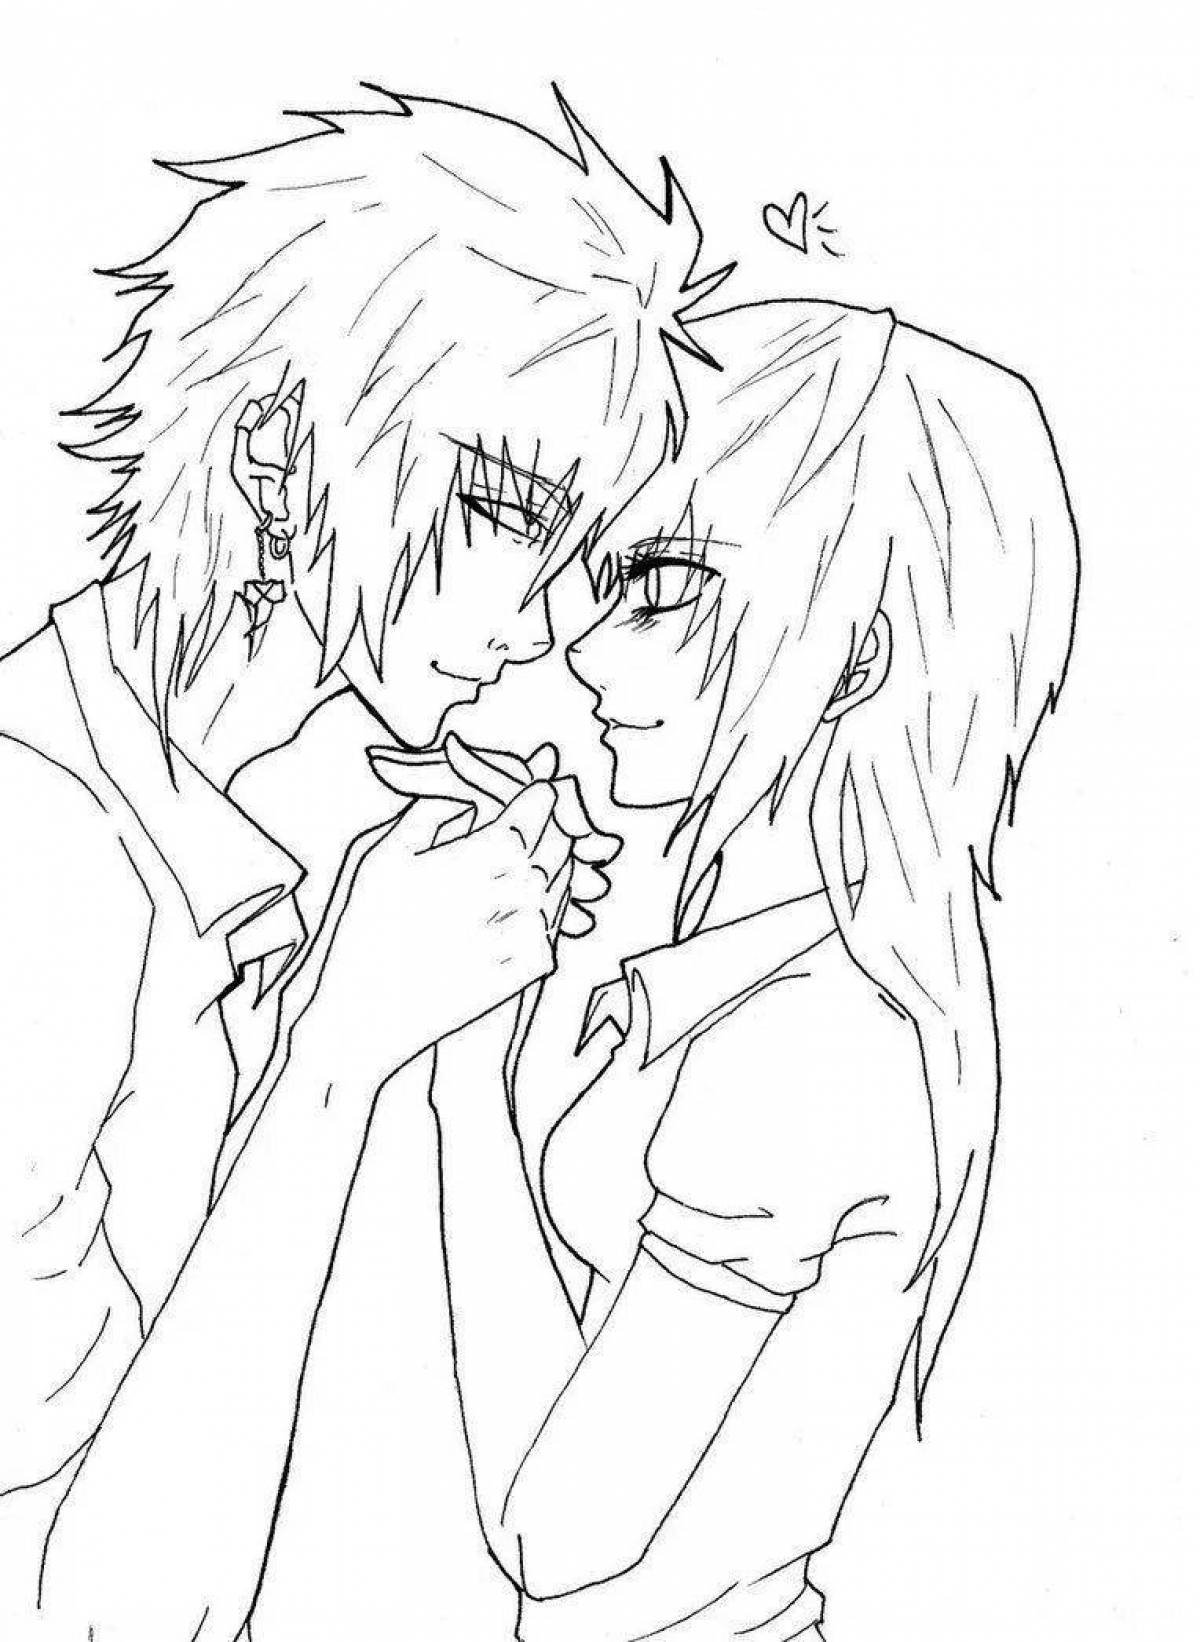 Coloring page enticing anime kiss